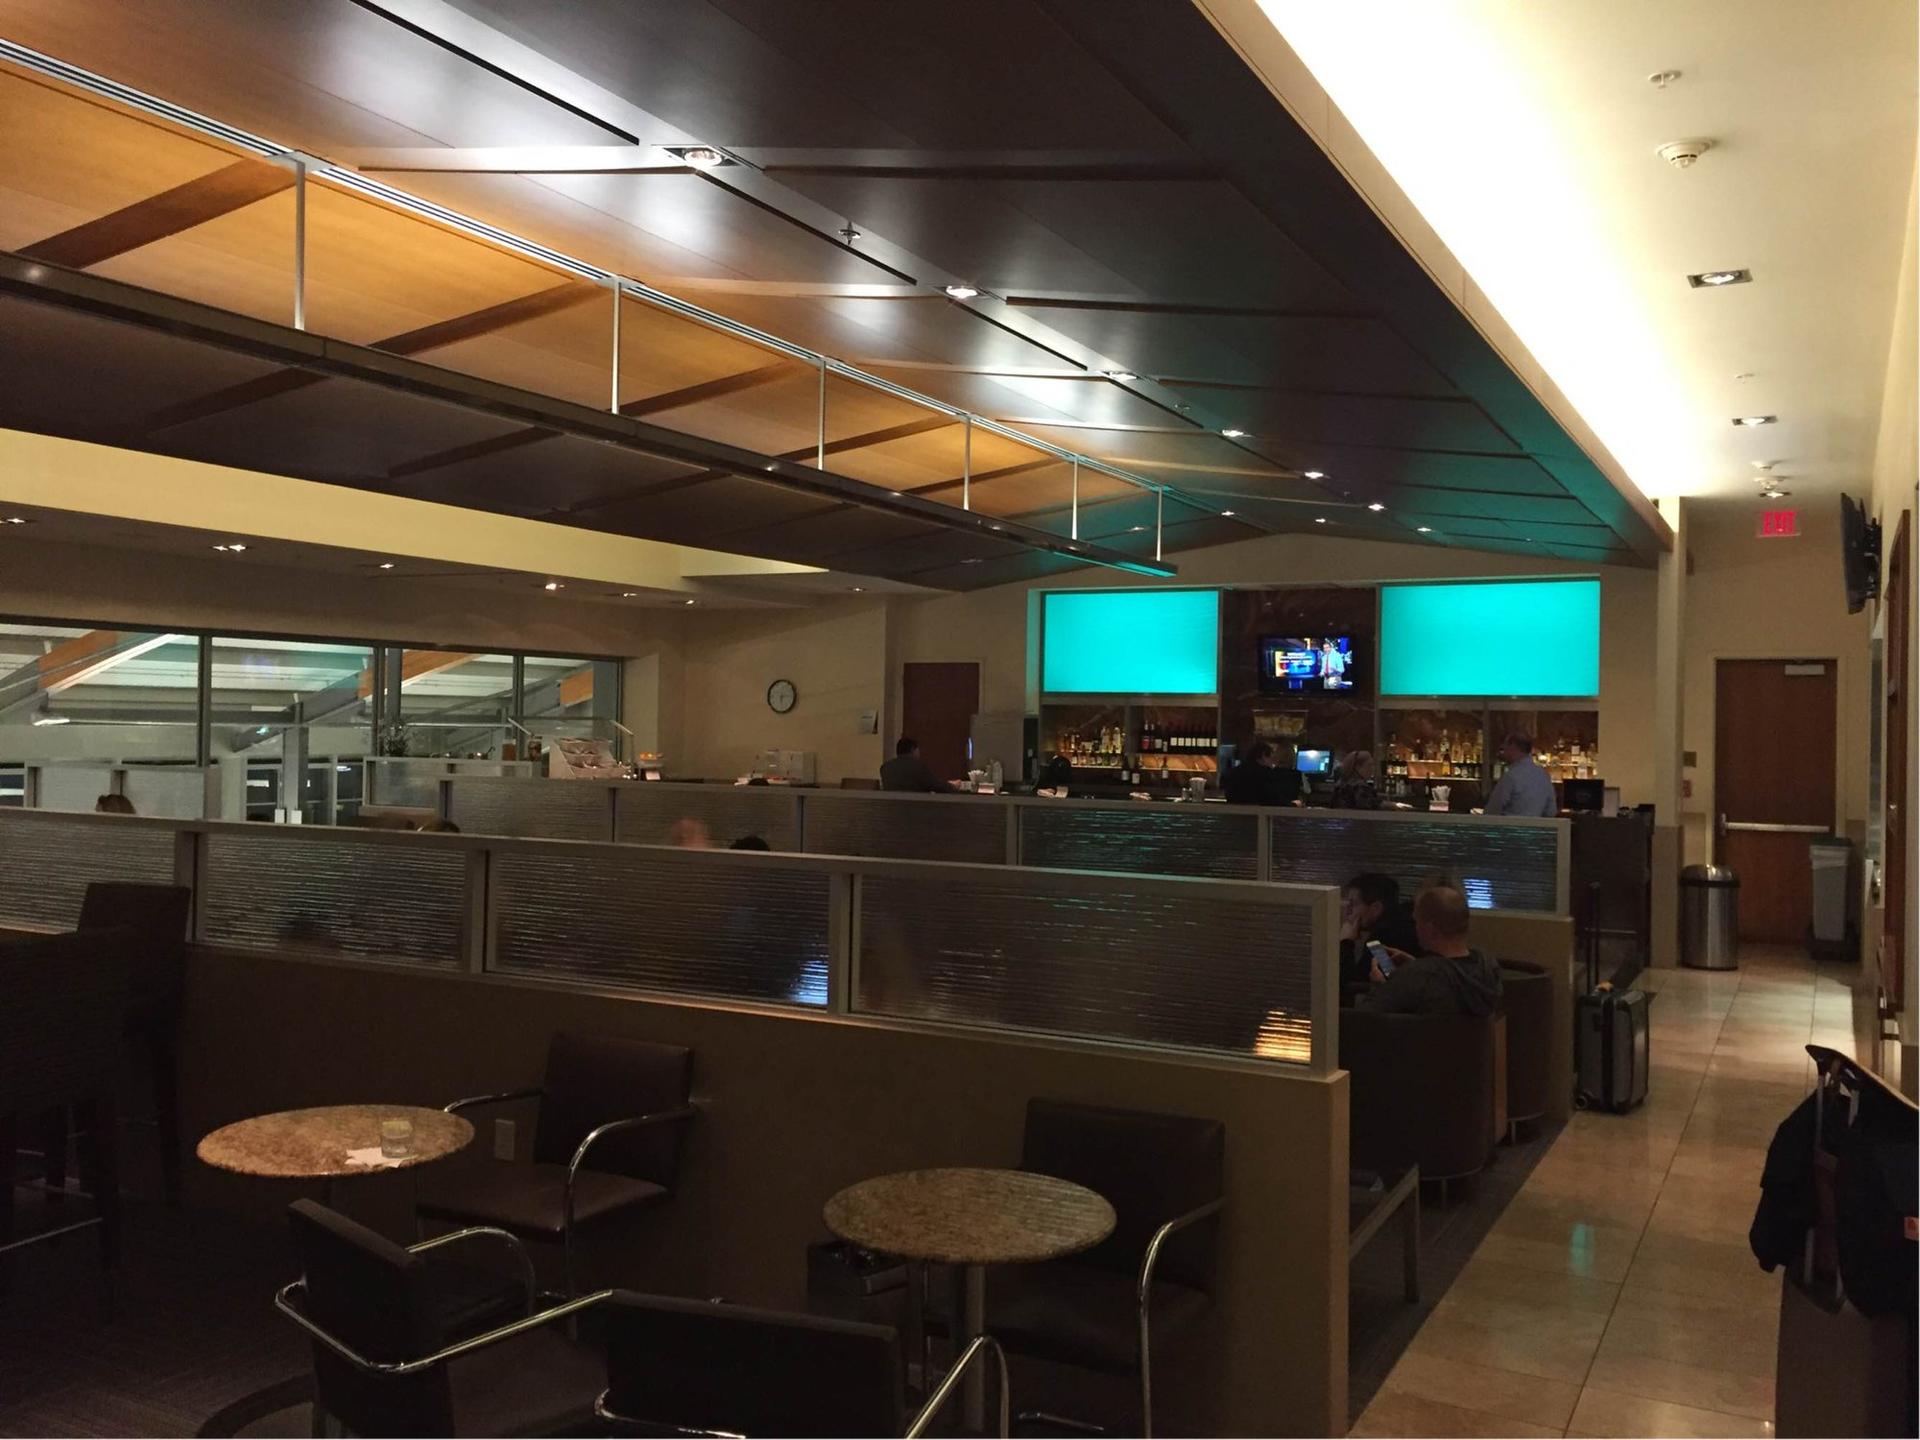 American Airlines Admirals Club image 18 of 31